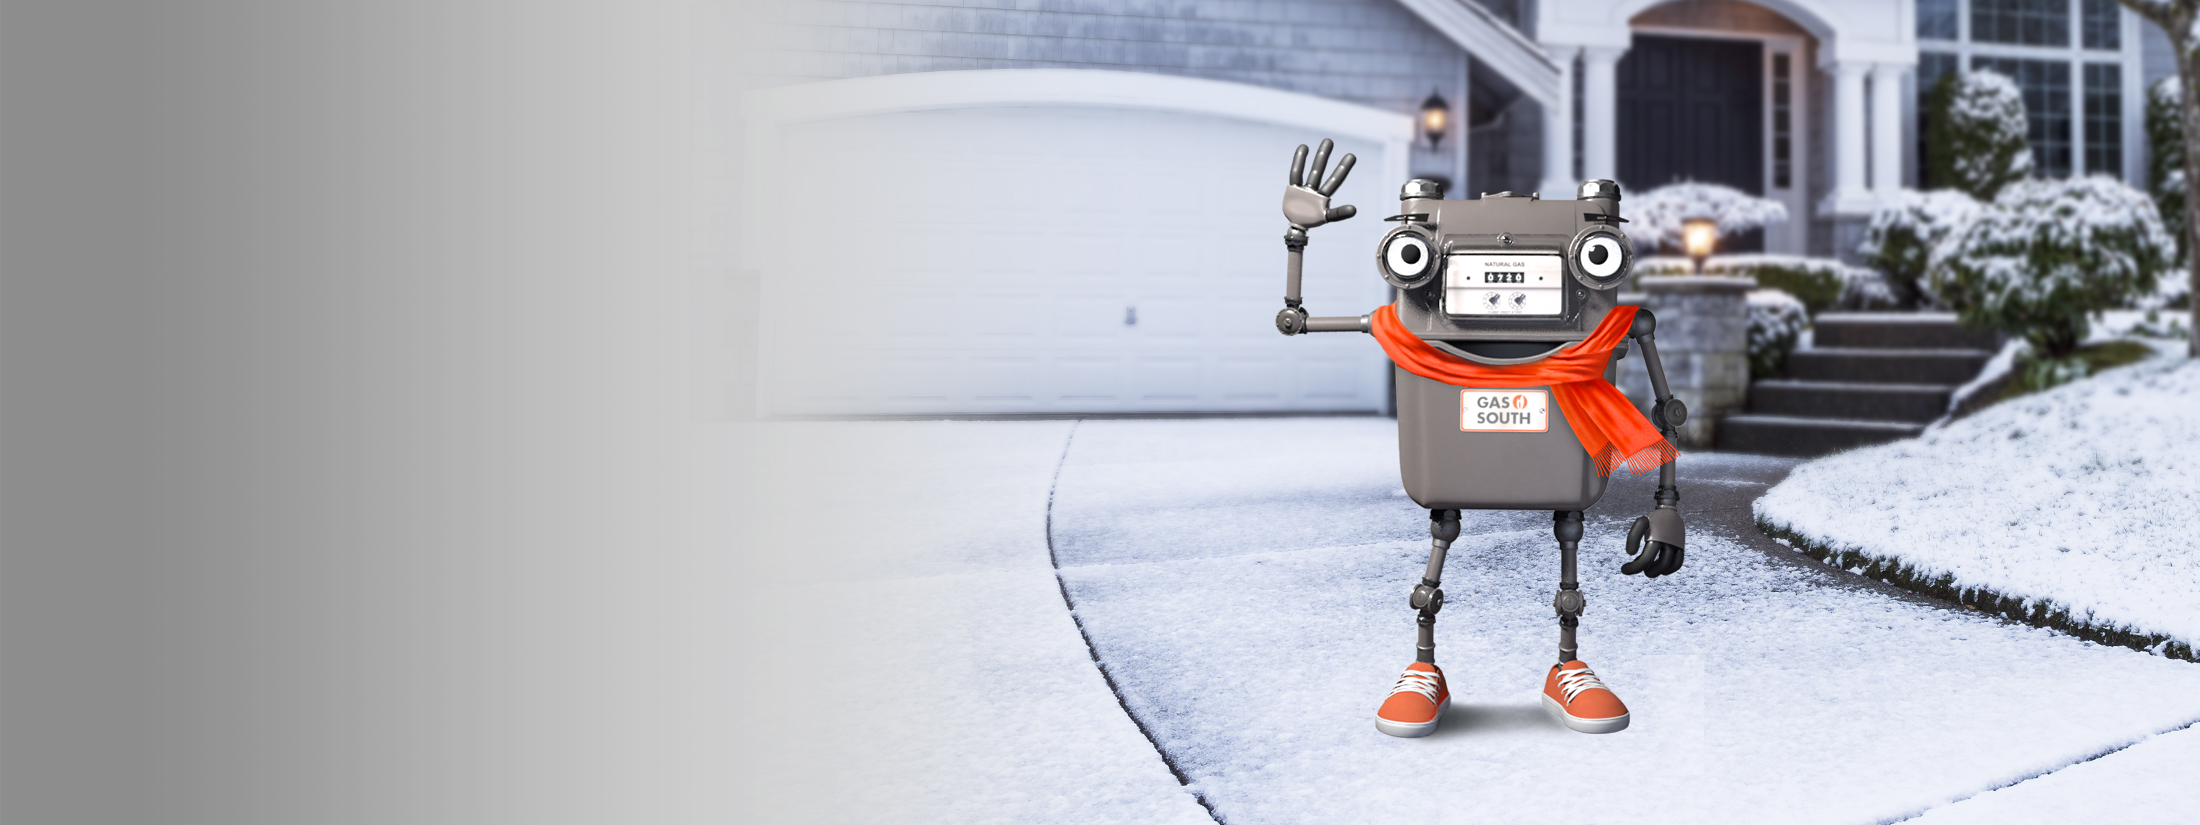 Mr. Meter in front of a house during winter